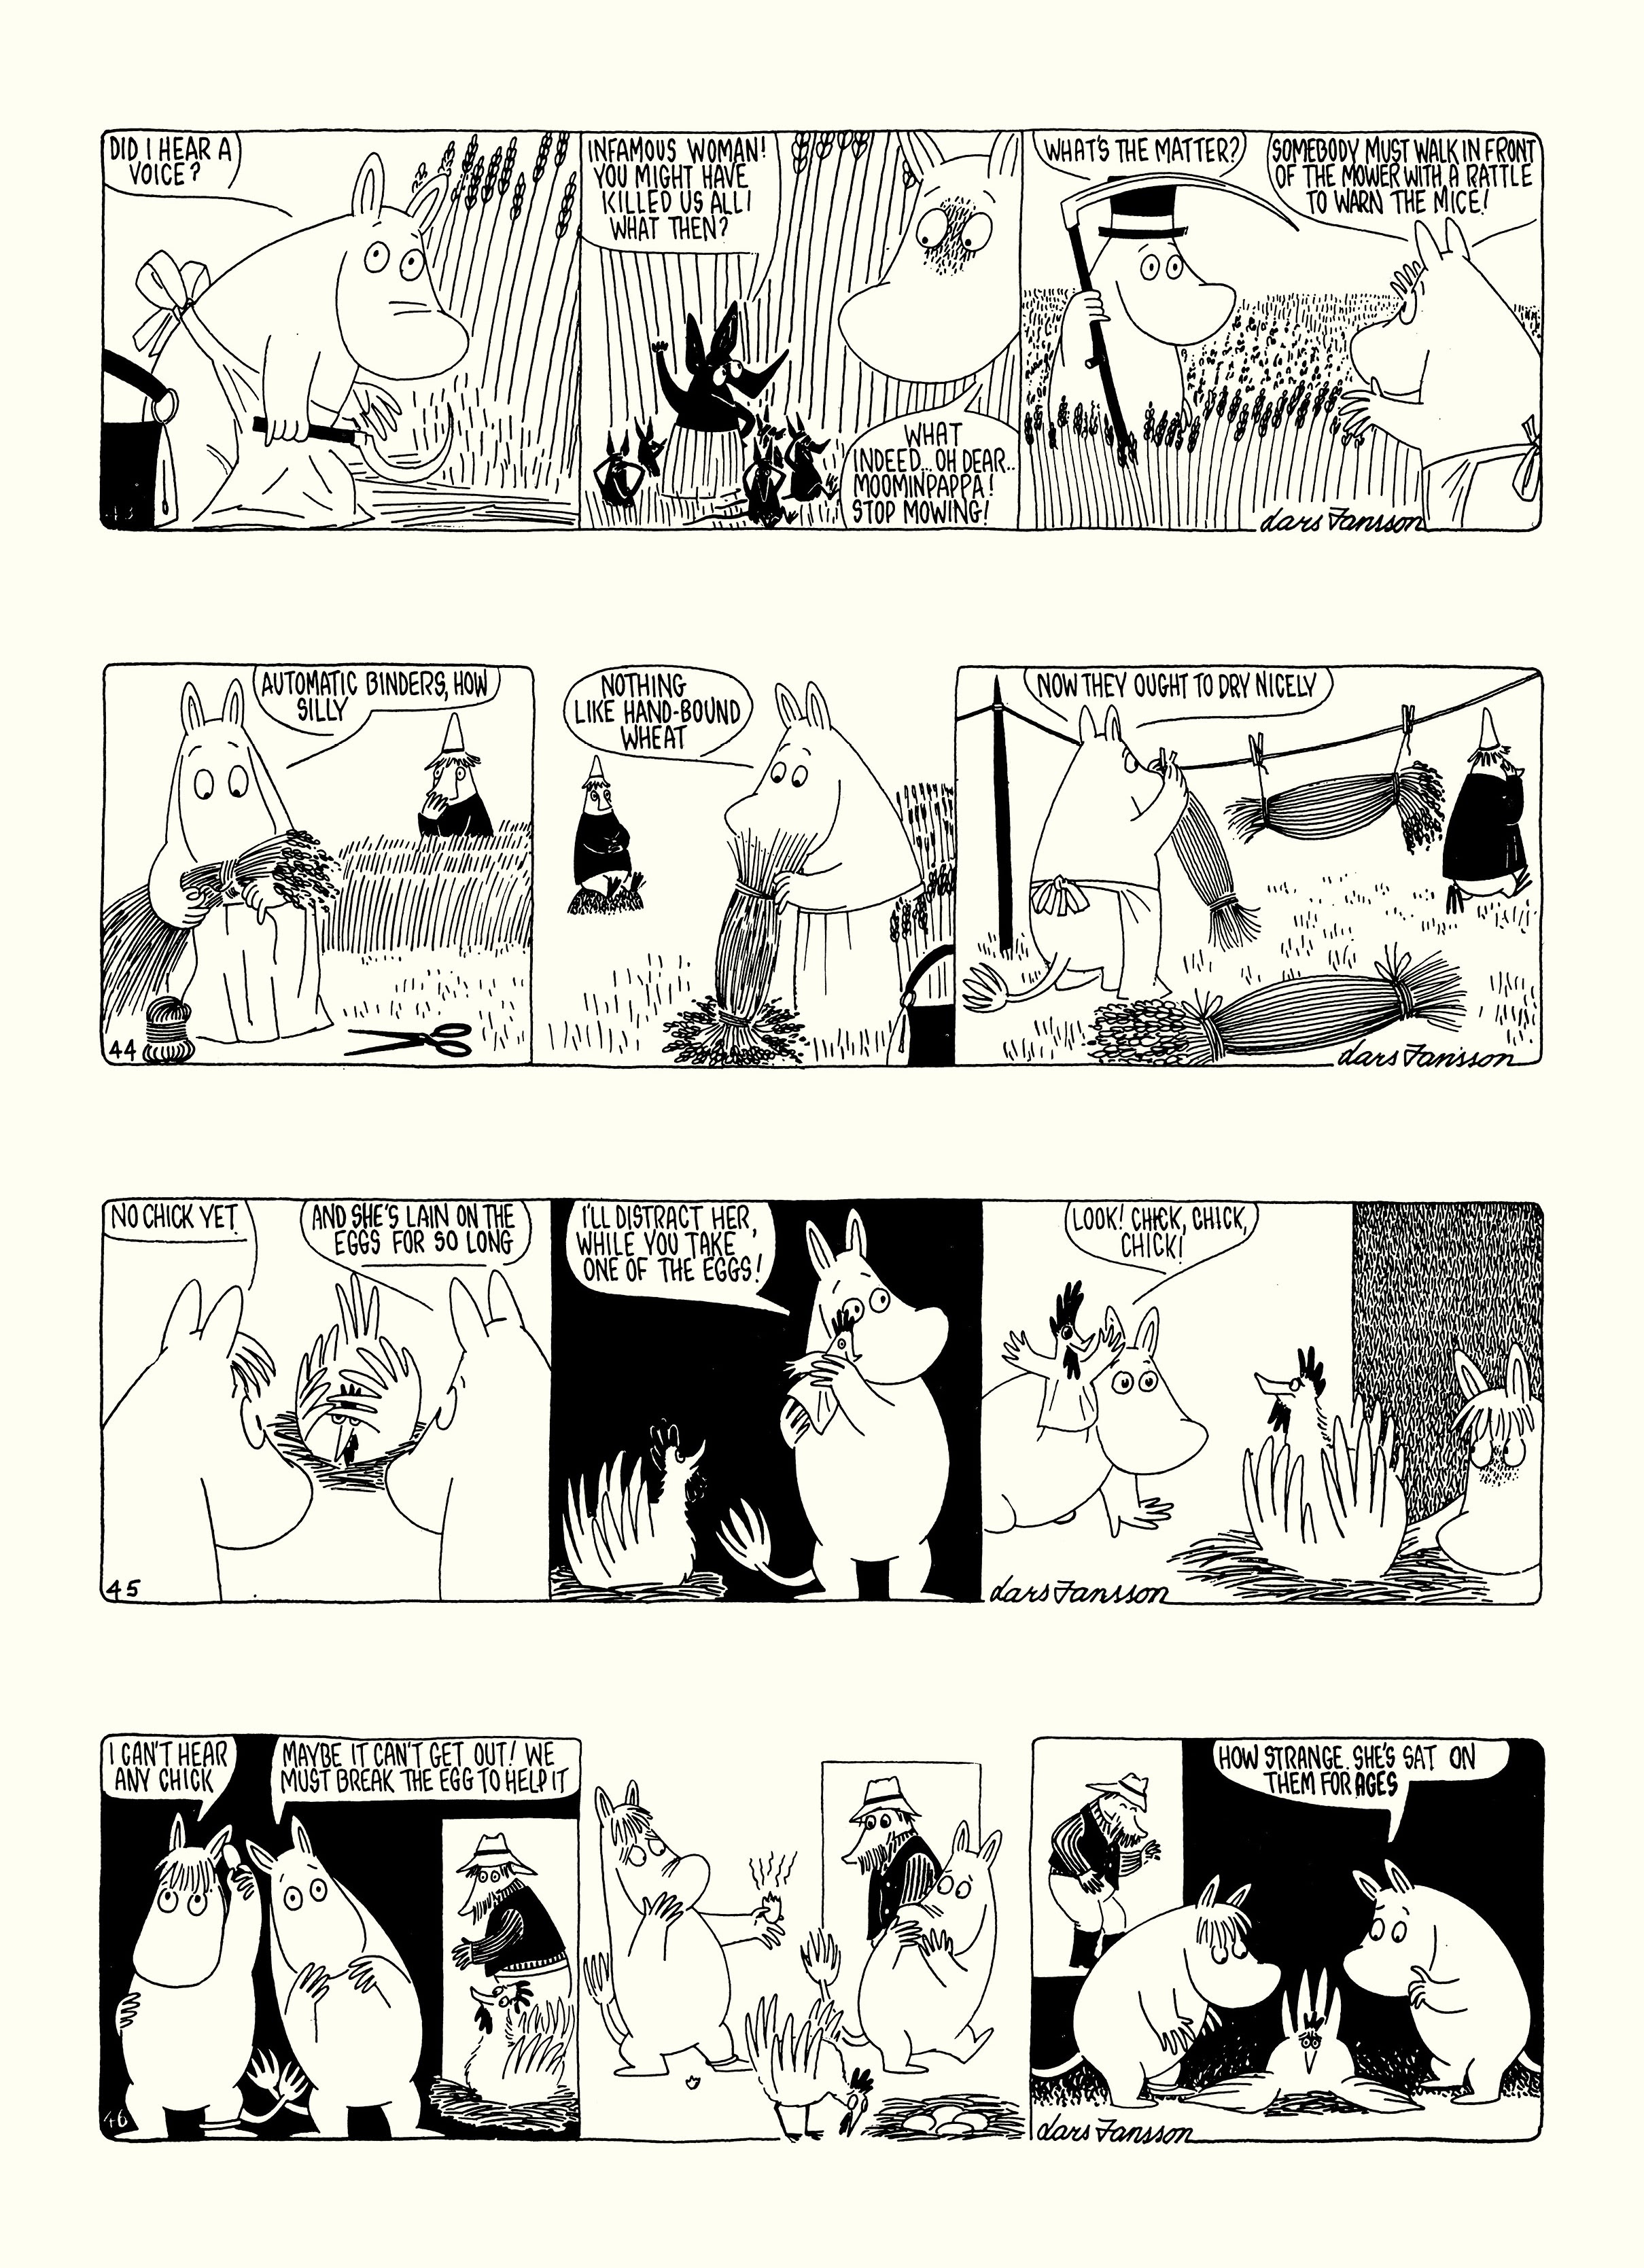 Read online Moomin: The Complete Lars Jansson Comic Strip comic -  Issue # TPB 7 - 59